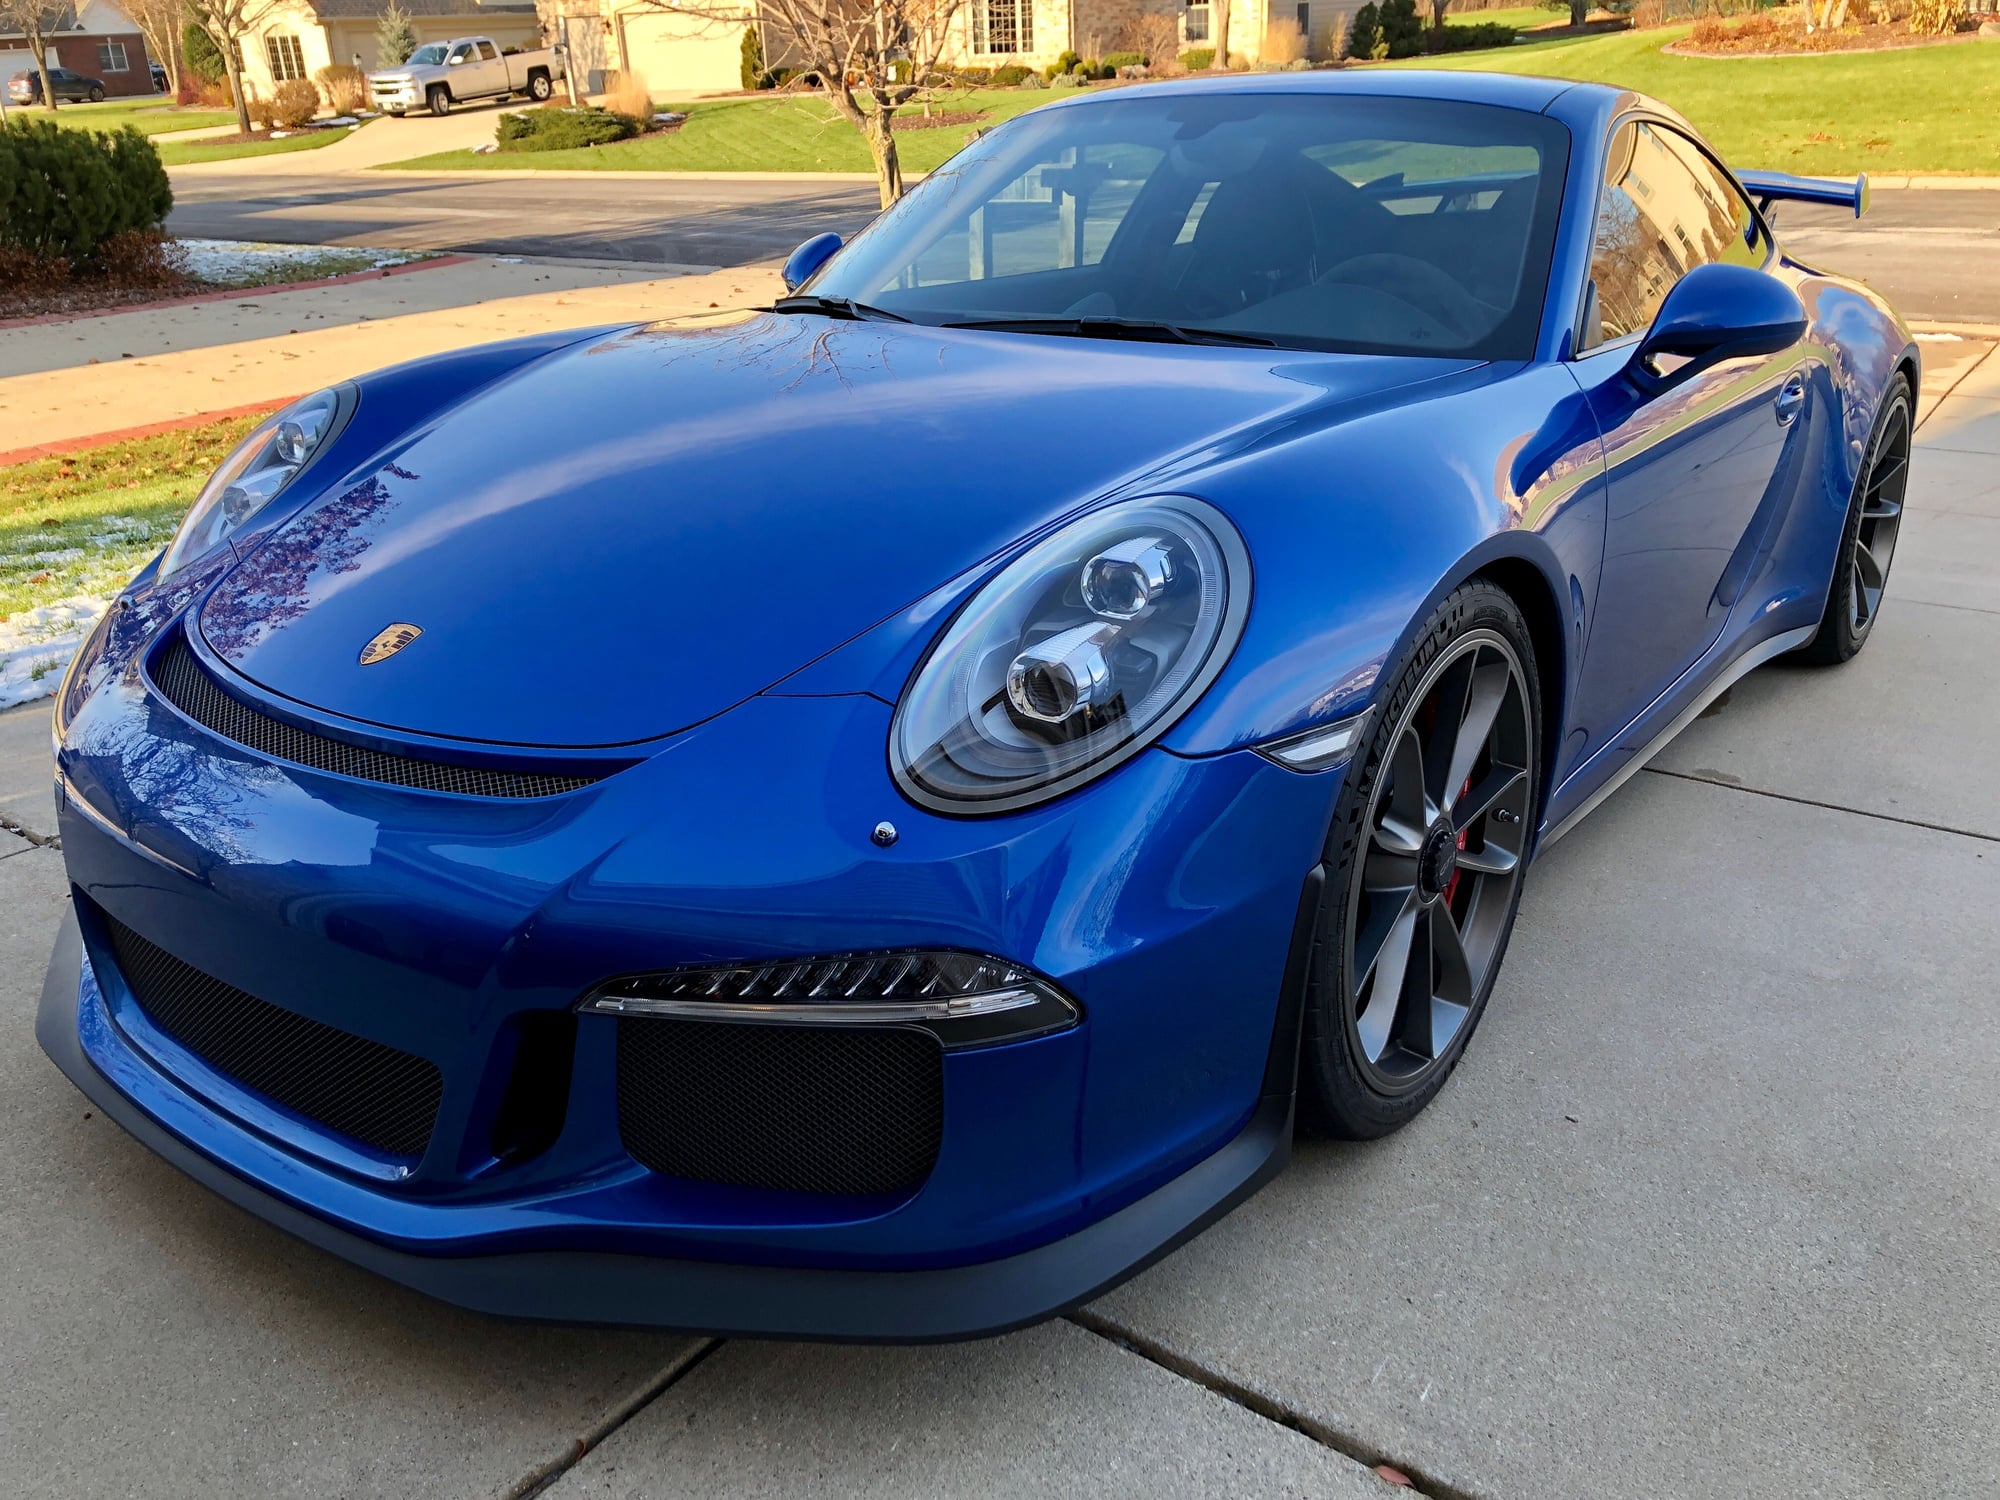 2016 Porsche GT3 - 2,400 miles/SB GT3 well optioned with LWBS - Used - VIN WP0AC2A98GS184249 - 2,234 Miles - 6 cyl - 2WD - Automatic - Coupe - Blue - Milwaukee, WI 53051, United States